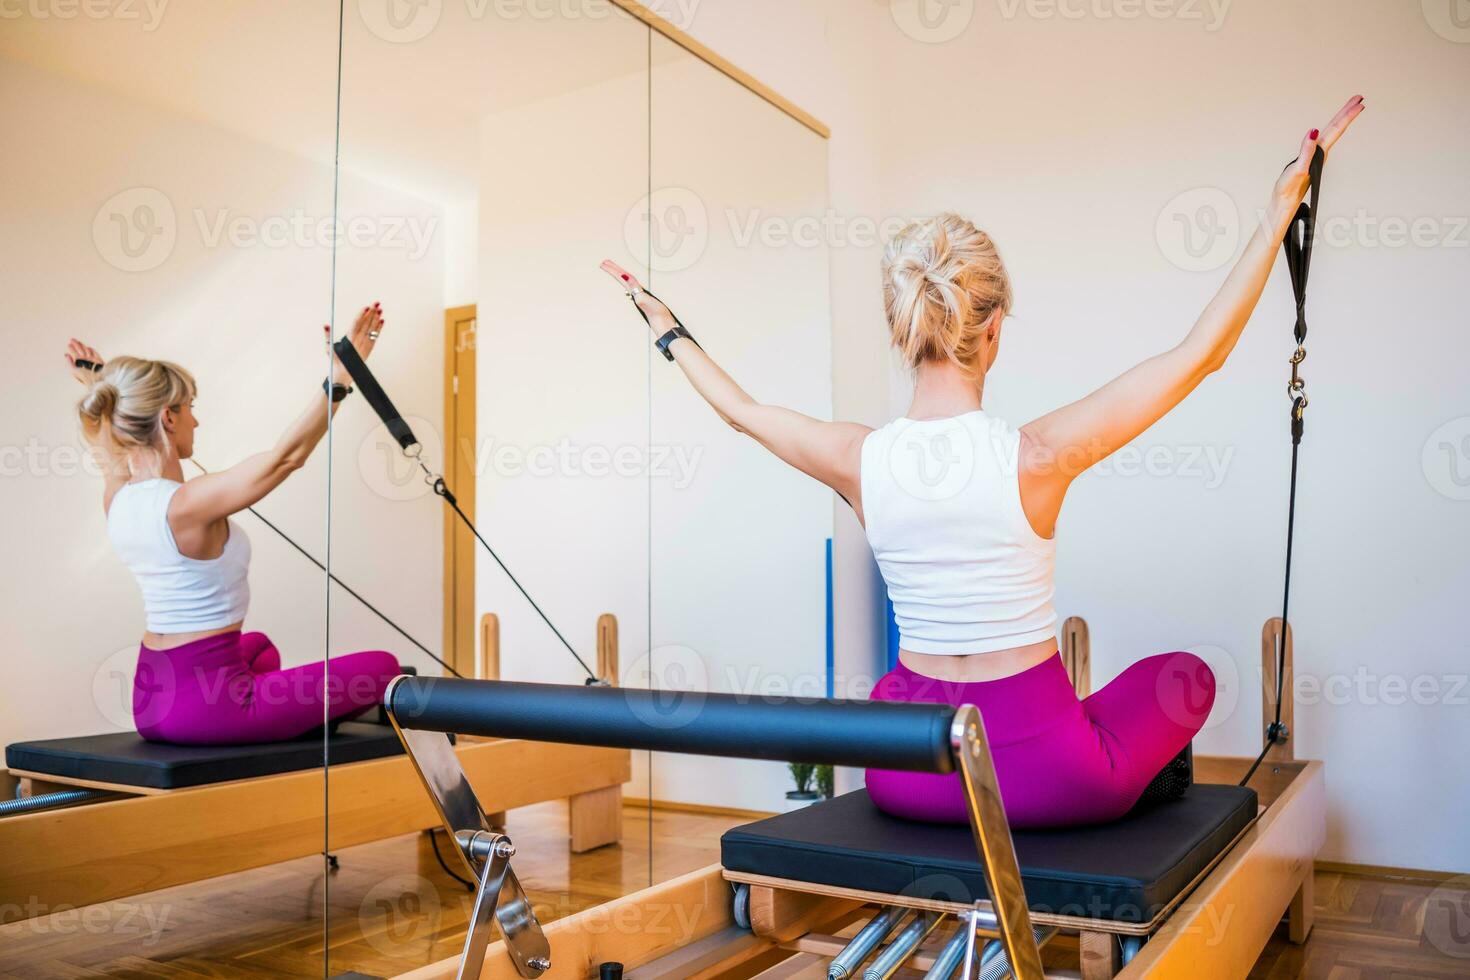 Blonde woman is exercising on pilates reformer bed in her home. 23255603  Stock Photo at Vecteezy